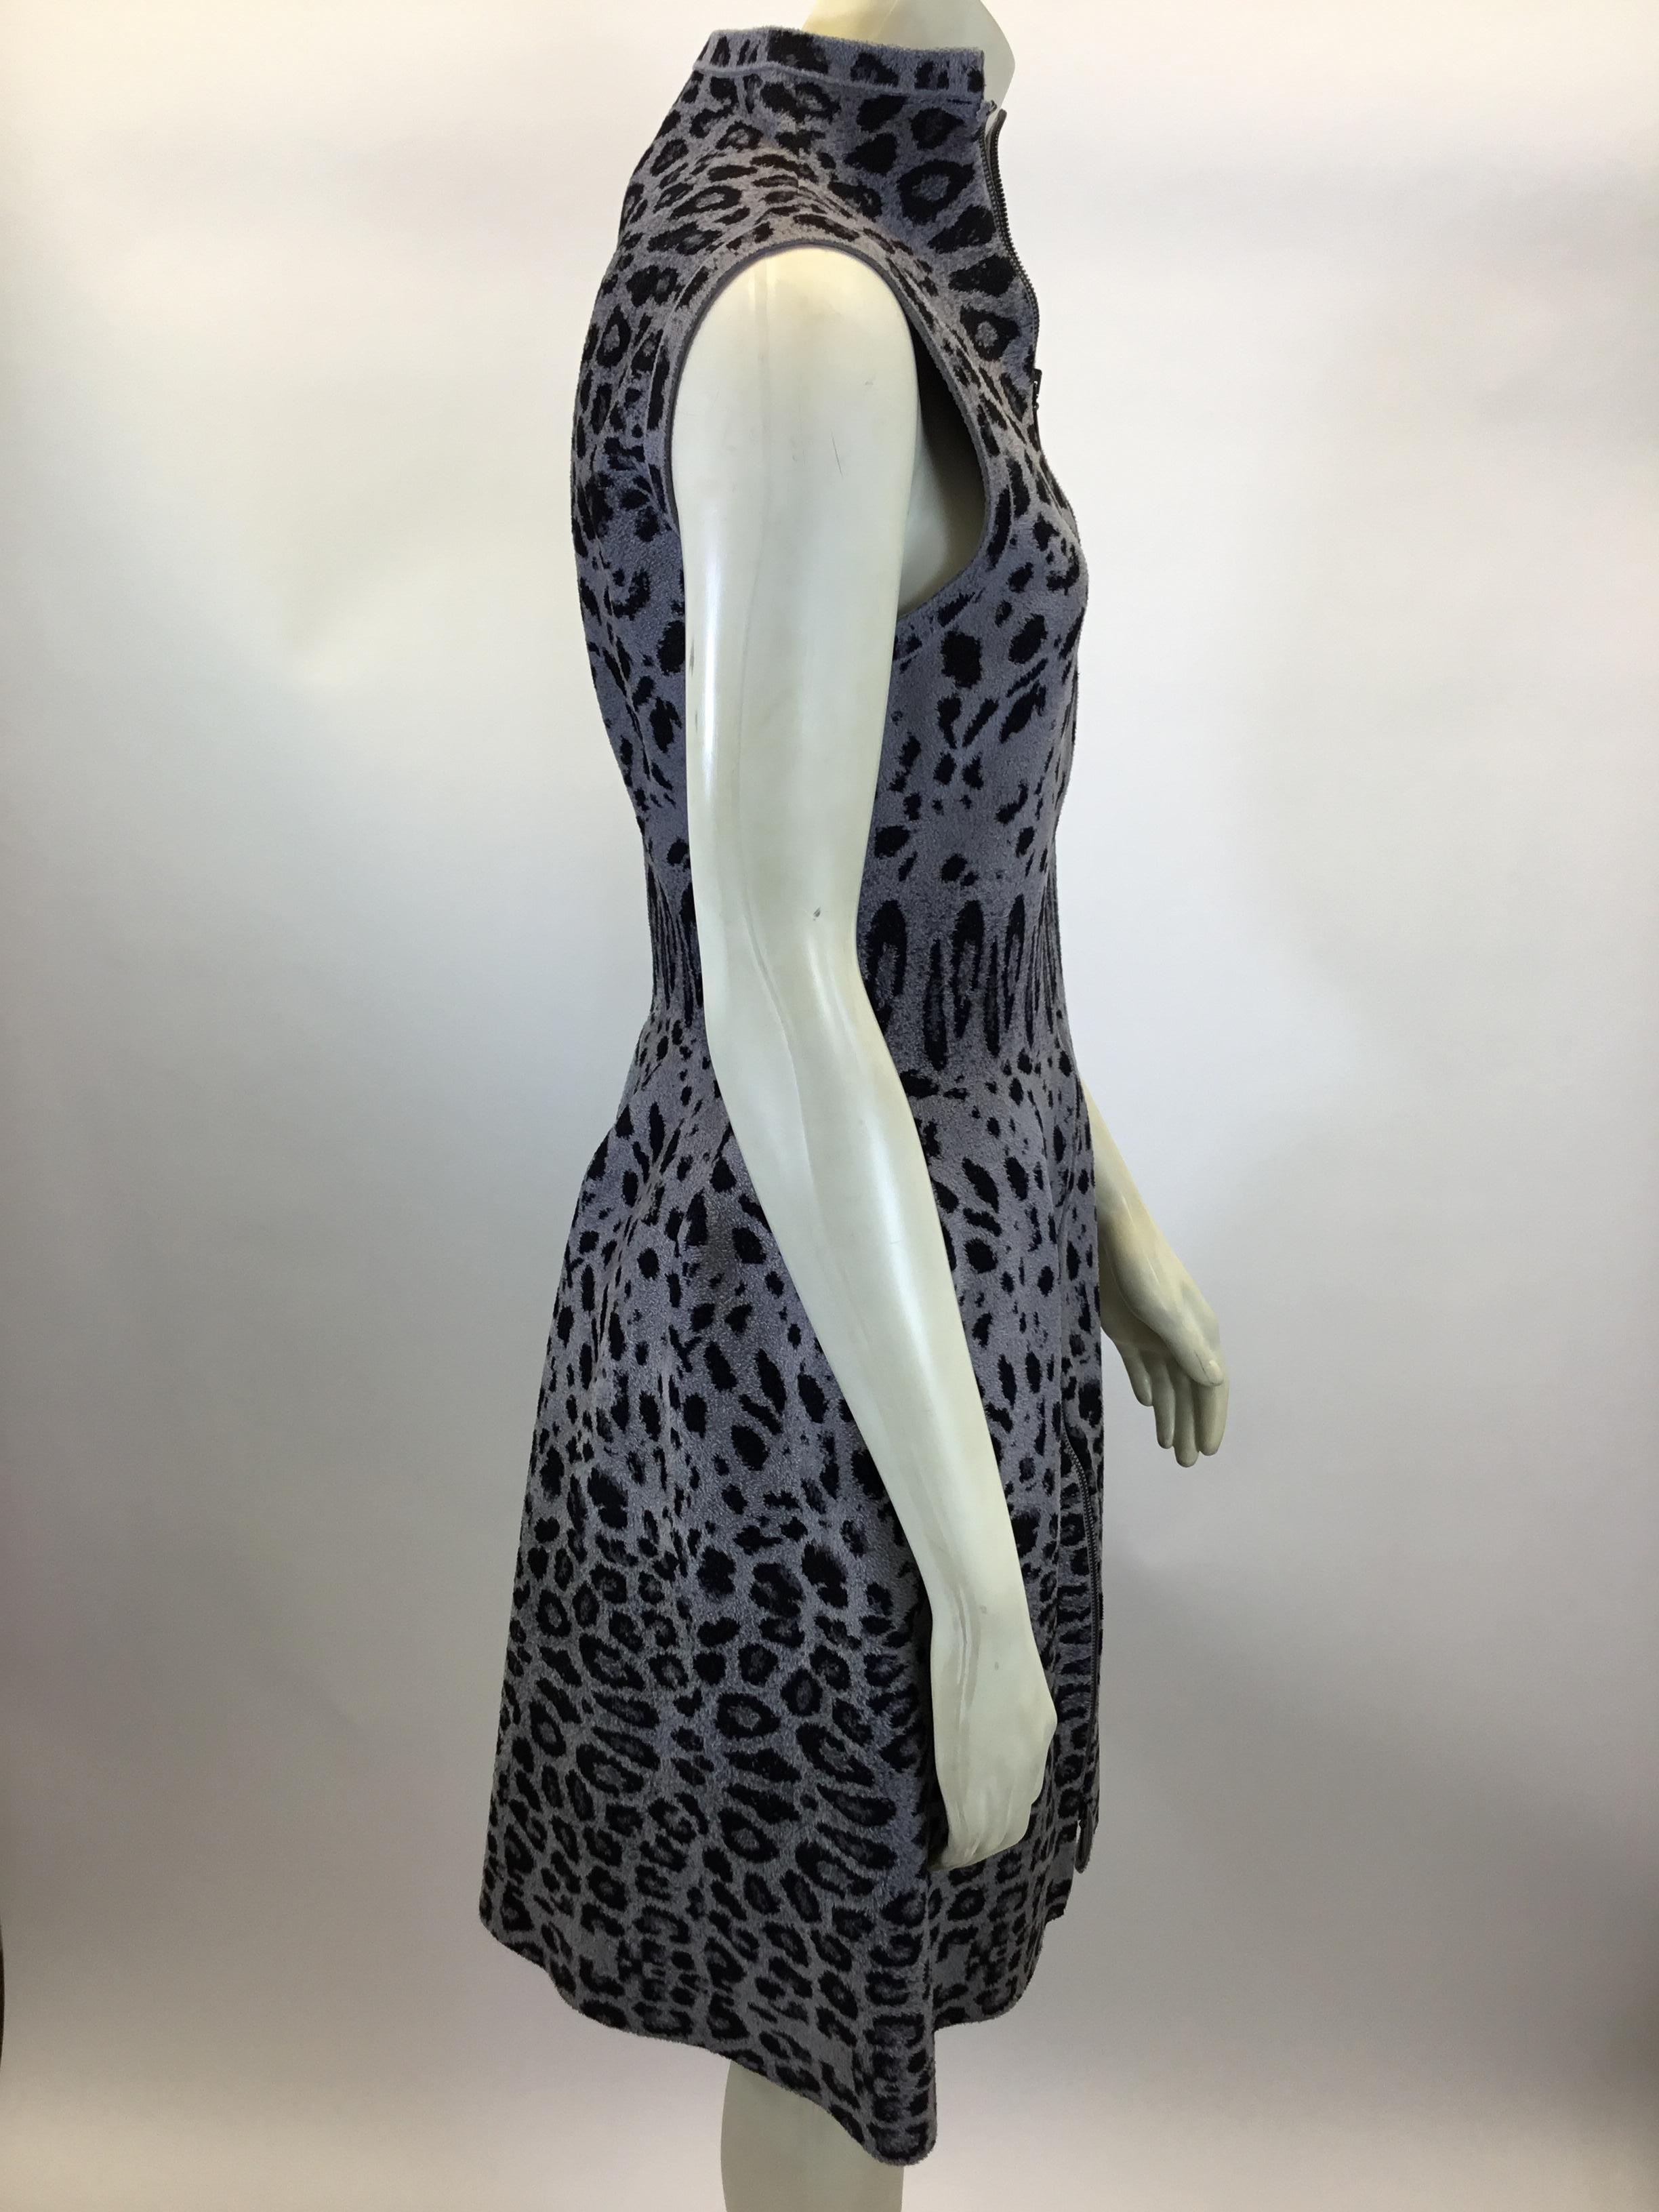 Alaia Grey and Black Animal Print Zip Up Dress In Excellent Condition For Sale In Narberth, PA